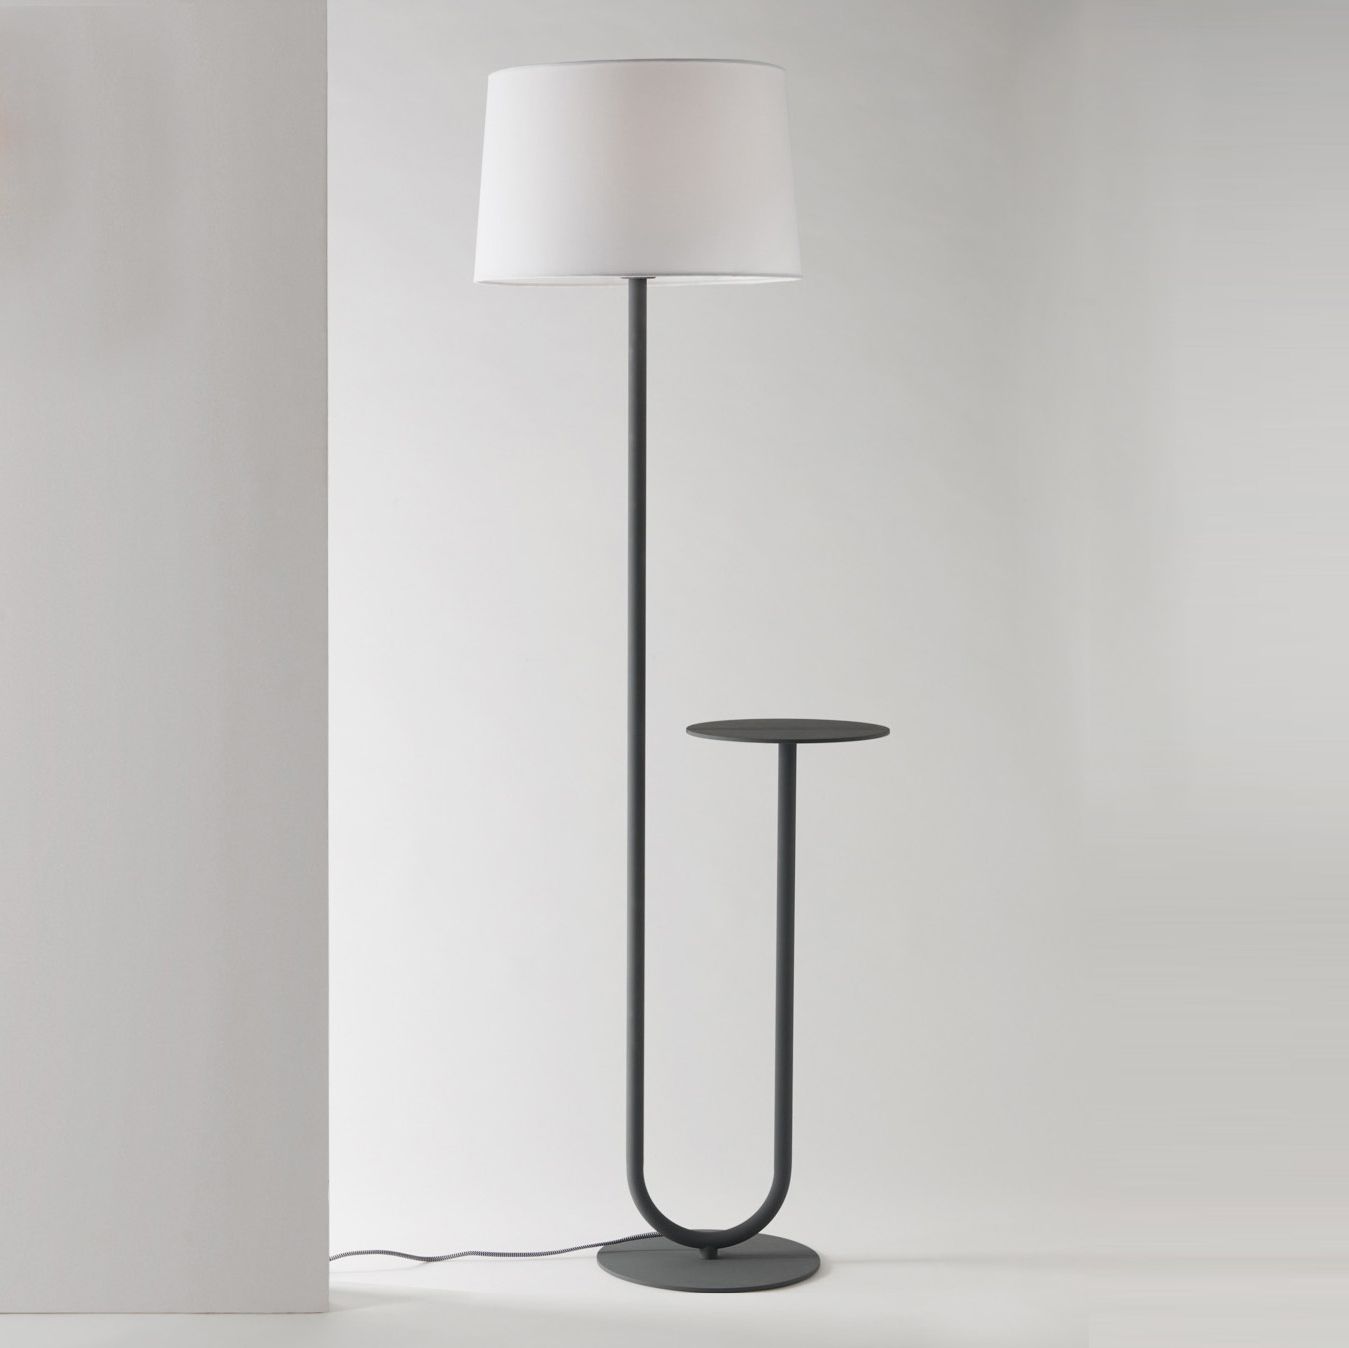 2019 Charcoal Grey Standing Lamps With Regard To Esta Charcoal Floor Lamp (View 3 of 10)